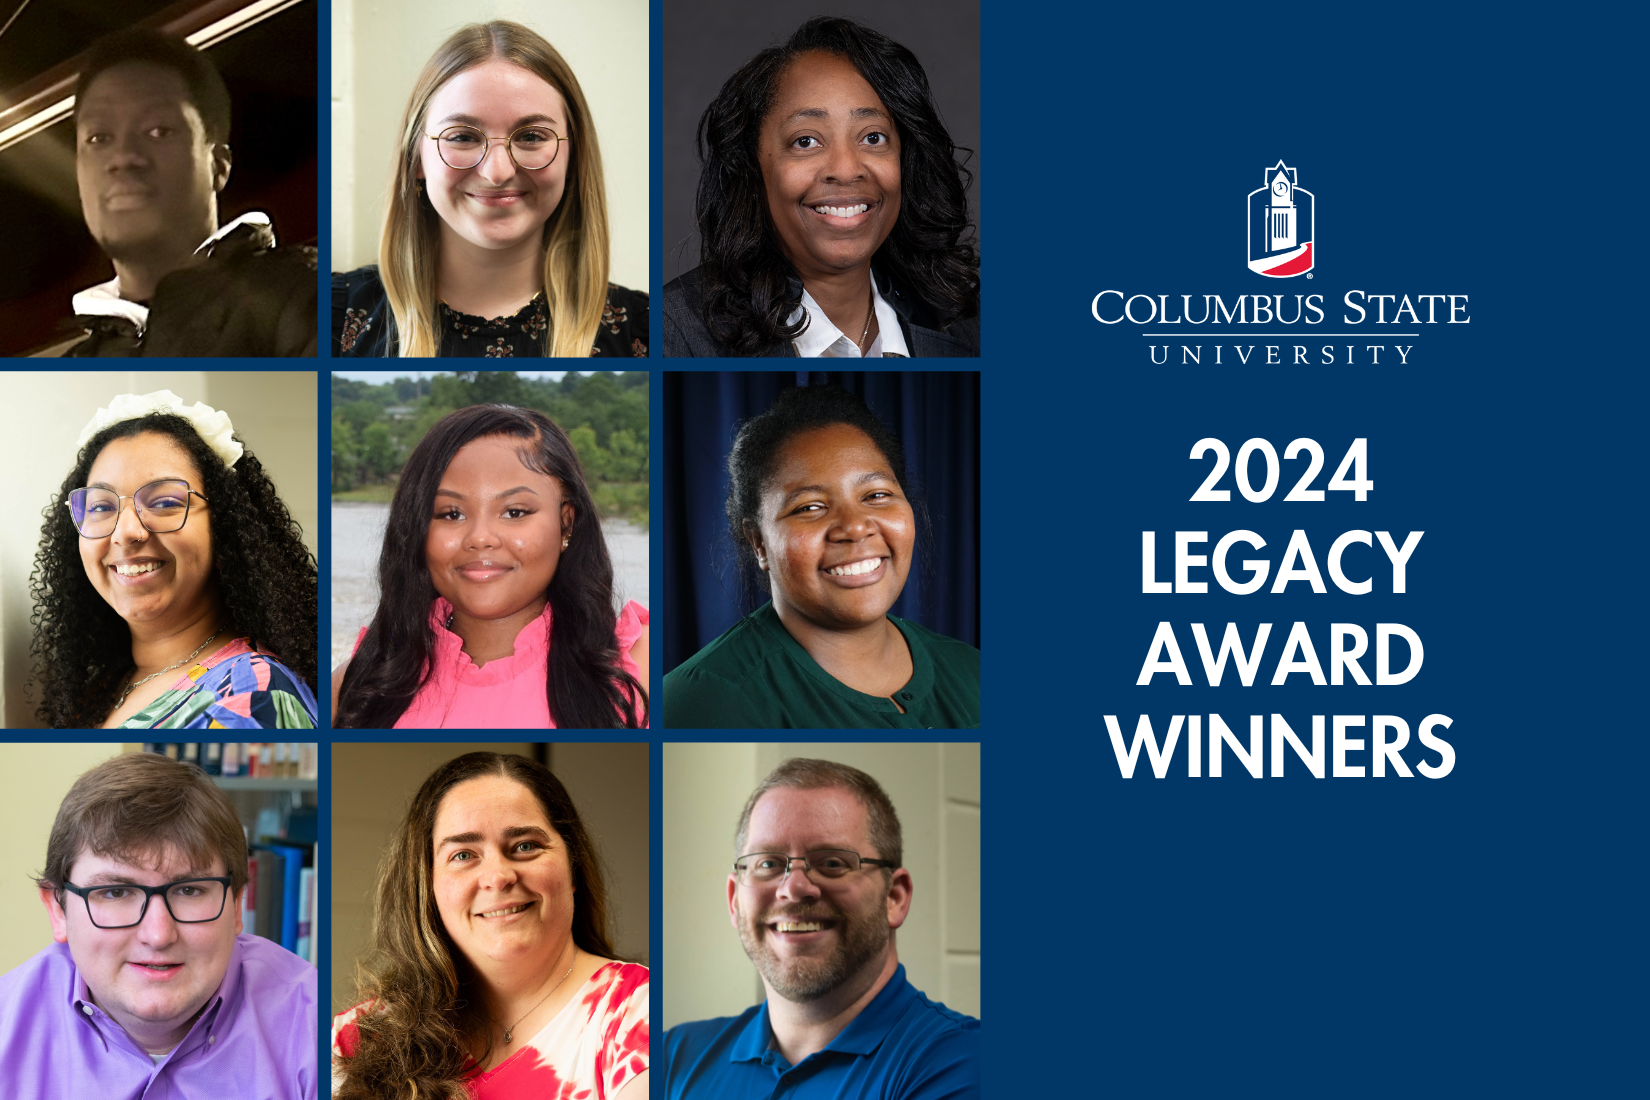 Grid of photos of award winner headshots with the Columbus State University logo and the title "2024 Legacy Award Winners)